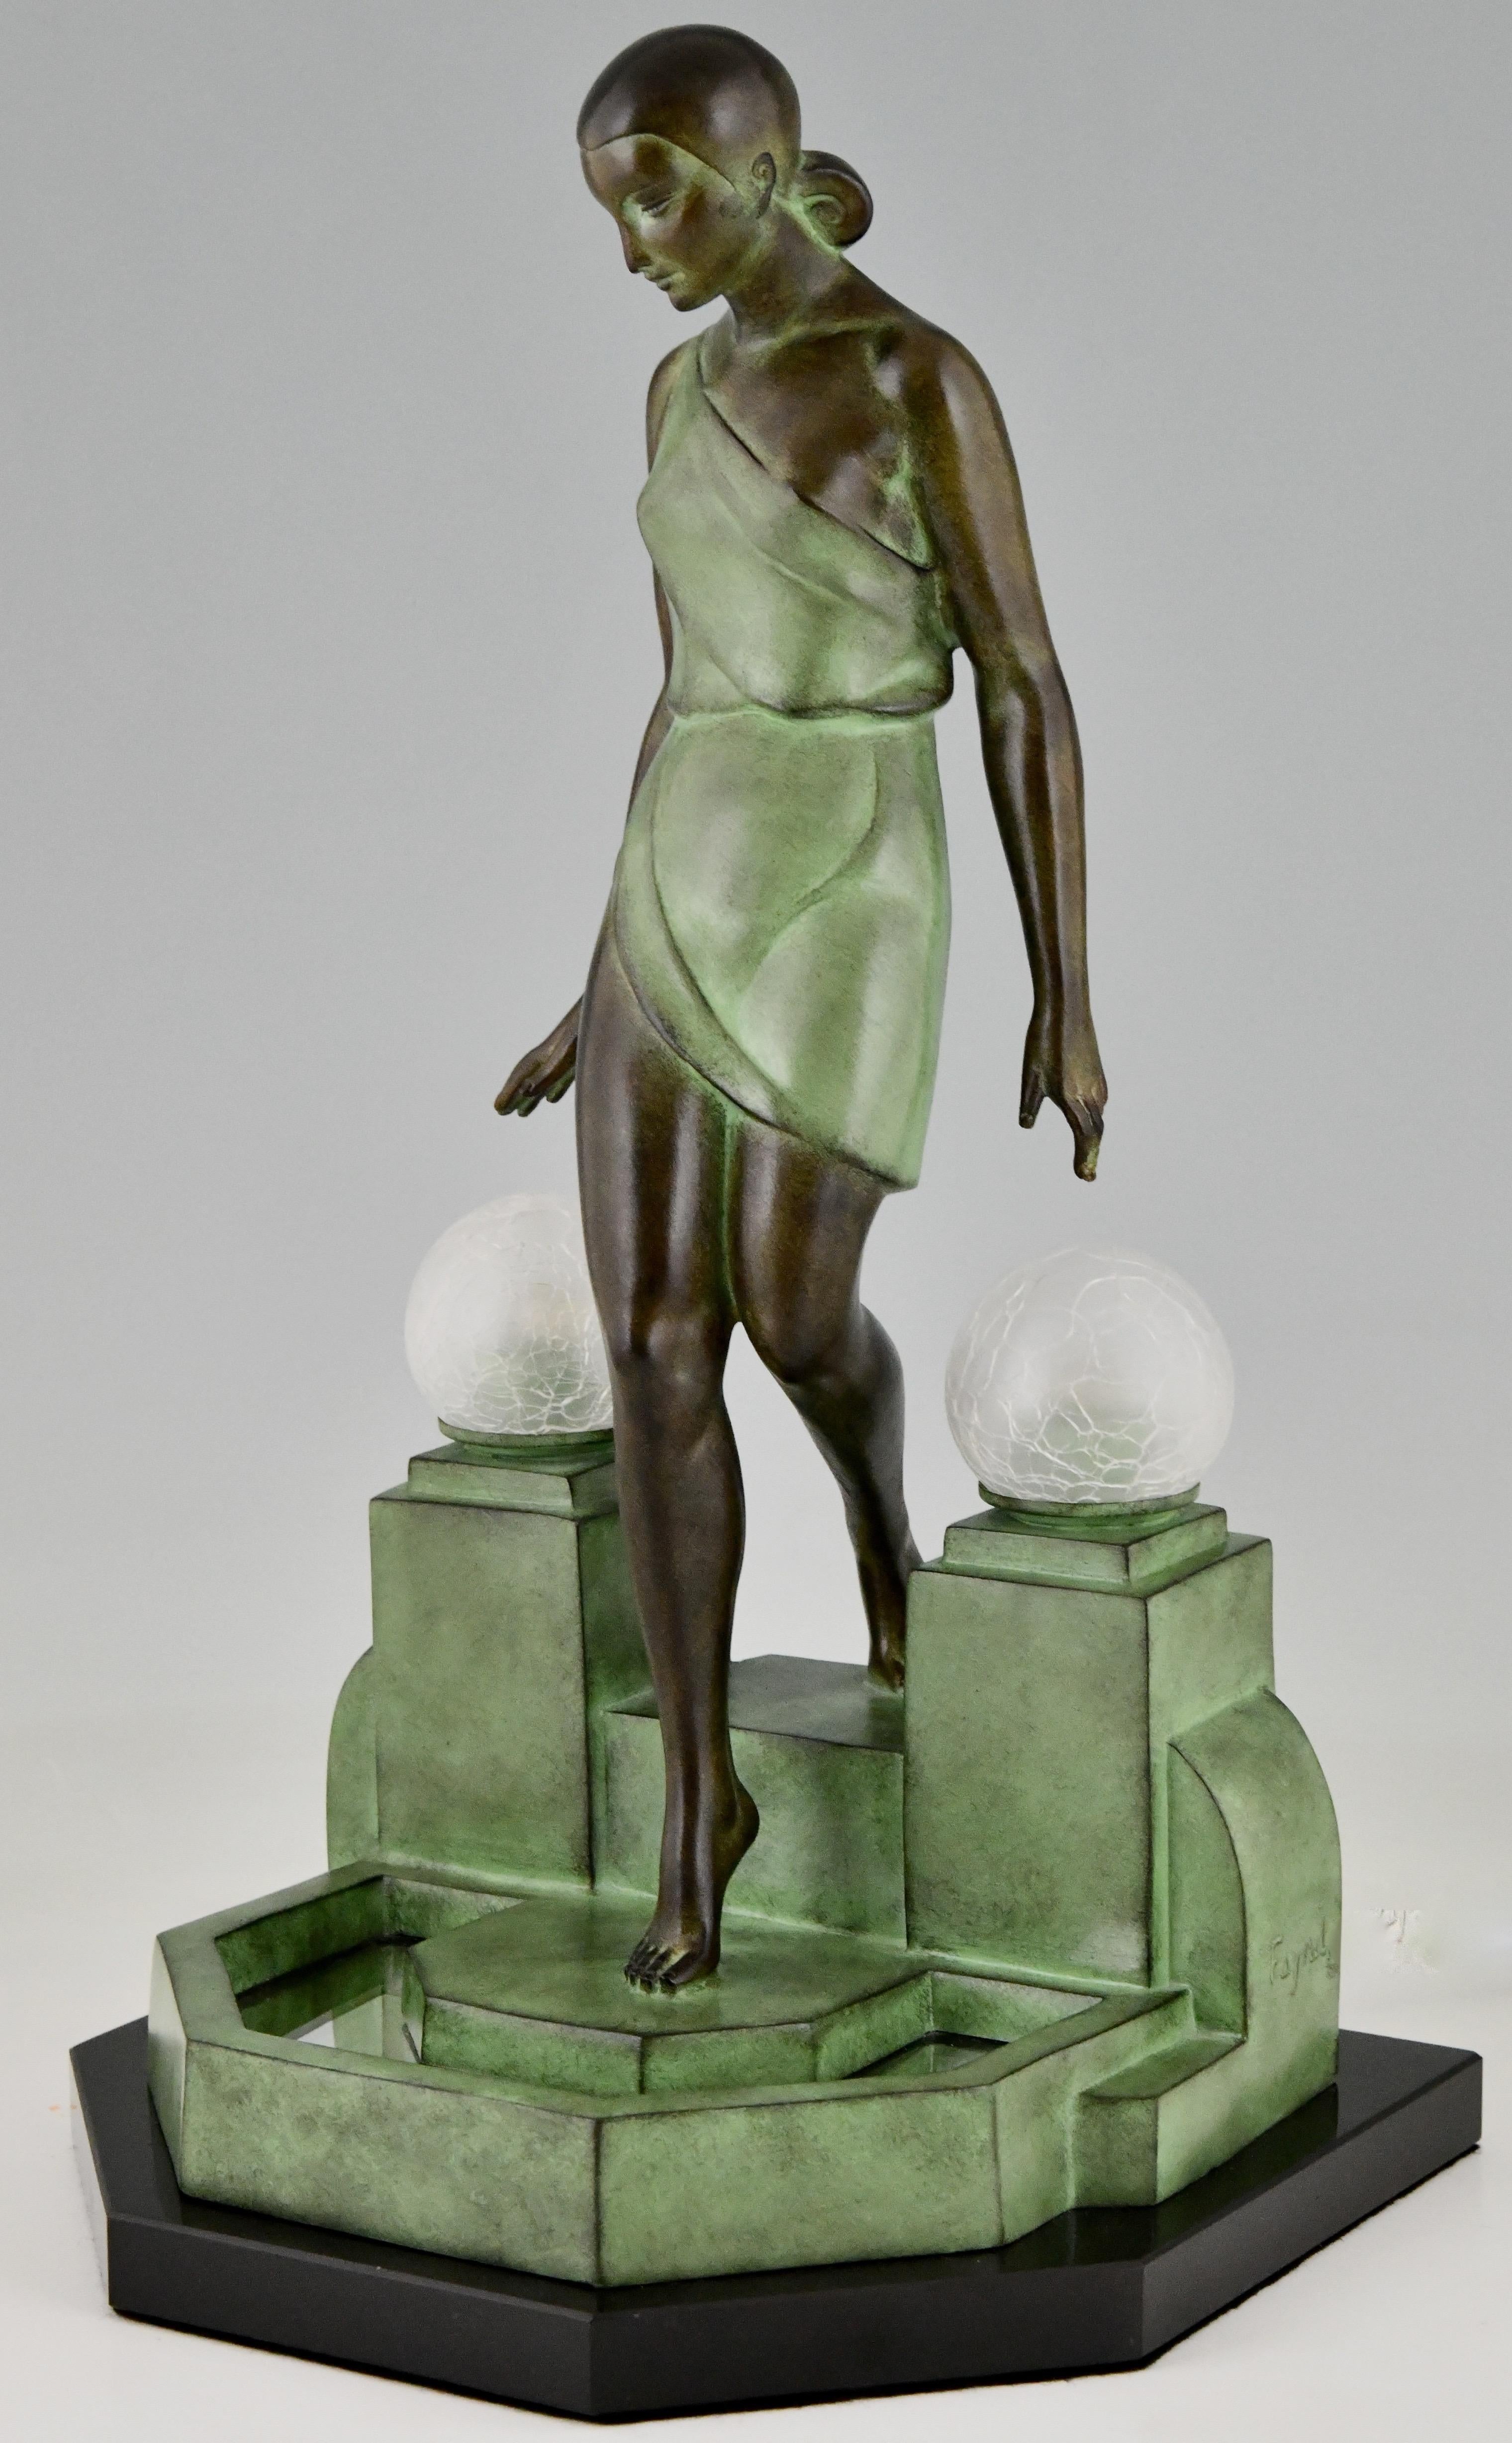 French Nausicaa Art Deco Style Lamp Lady at a Fountain by Fayral for Max Le Verrier